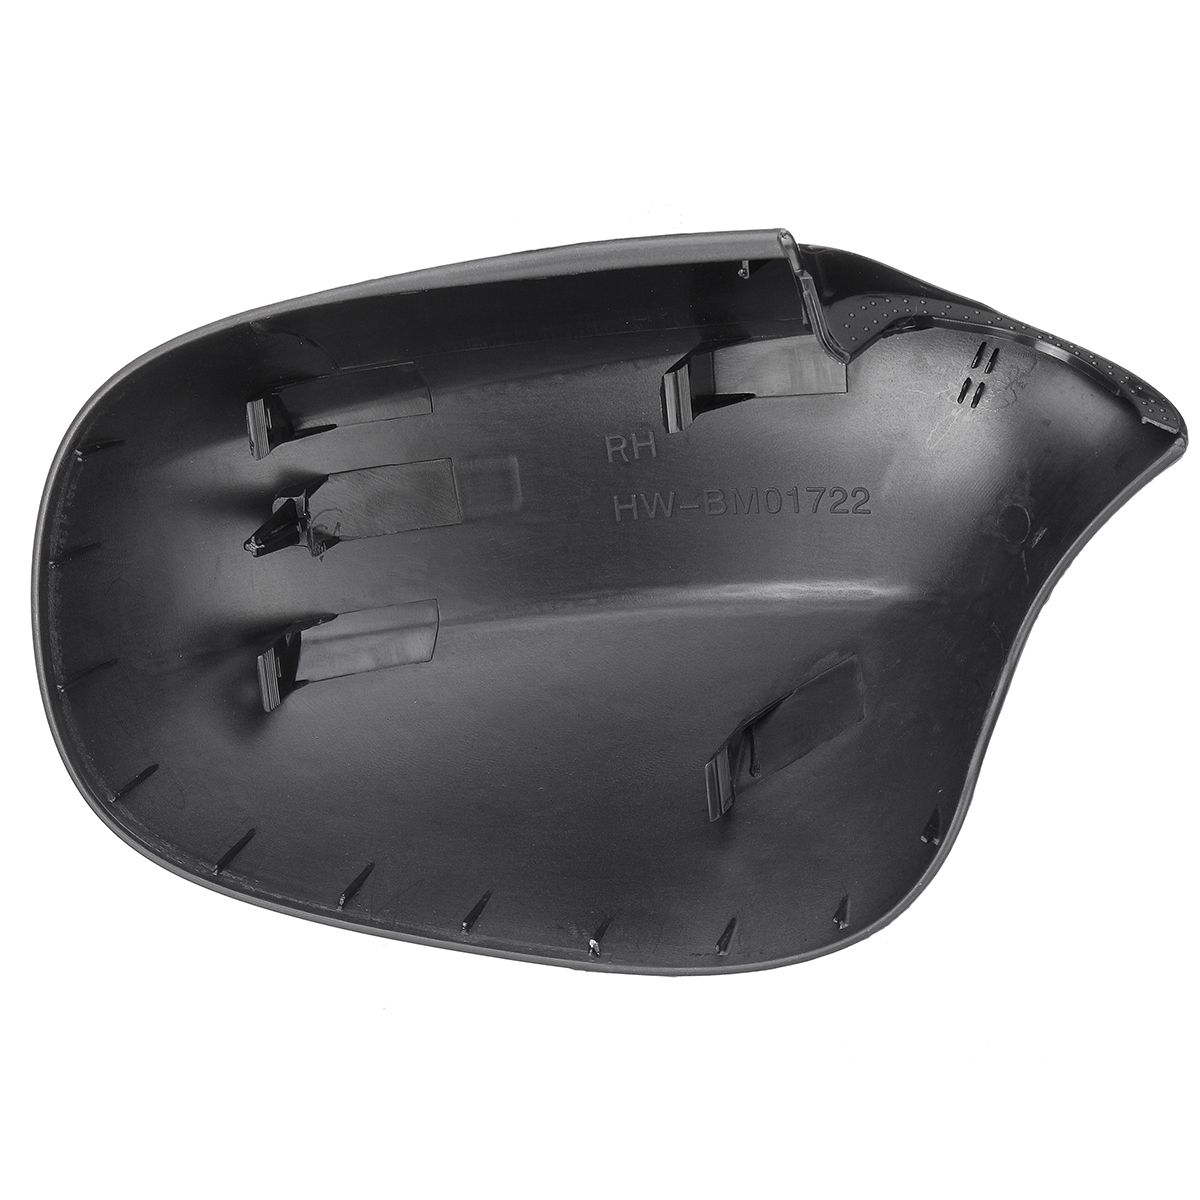 Pair-Gloss-Black-Car-Wing-Side-Mirror-Cover-for-BMW-3-Series-E90-323i-328i-328xi-335d-1542146